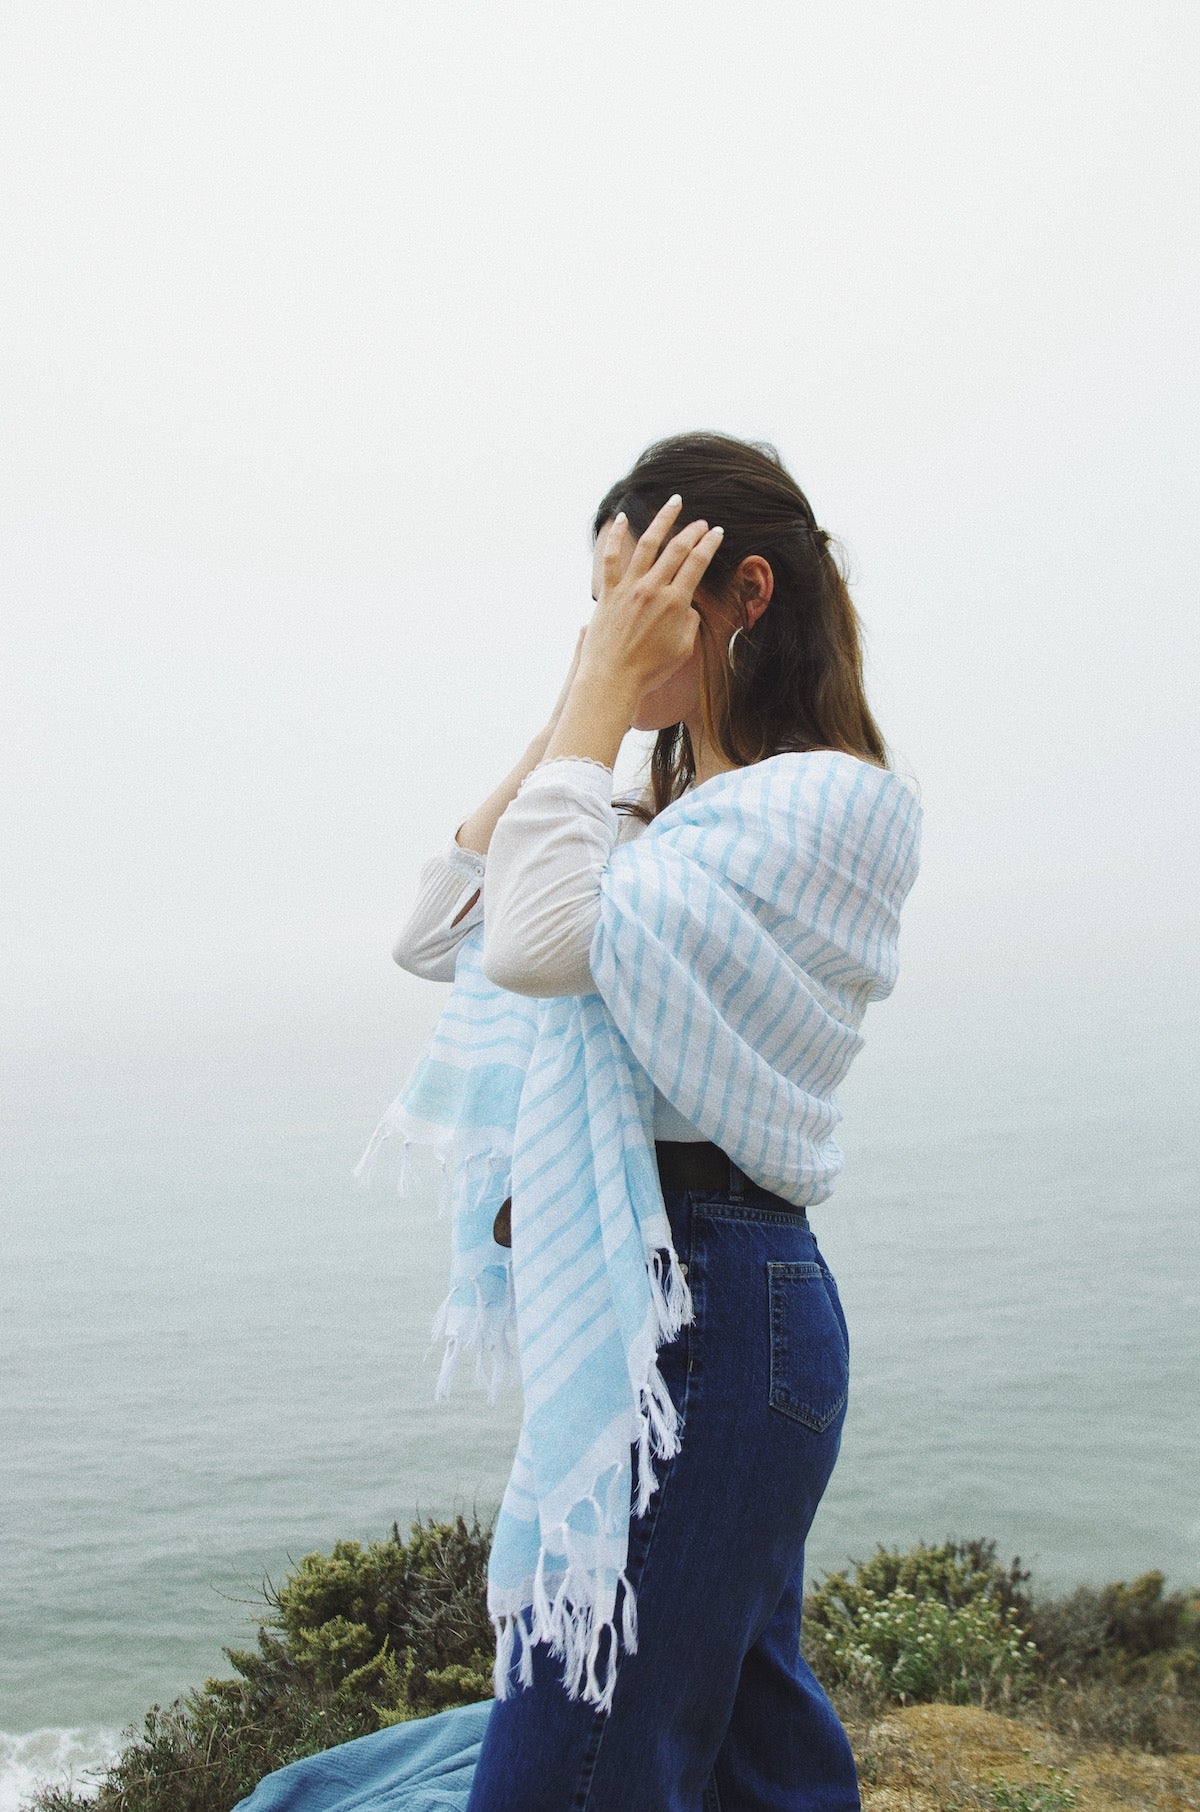 A woman with her back turned to the camera, wearing a white blouse and blue jeans, has a blue and white striped scarf over her shoulder. Her hand is touching her hair, and she's overlooking a foggy coastal landscape.